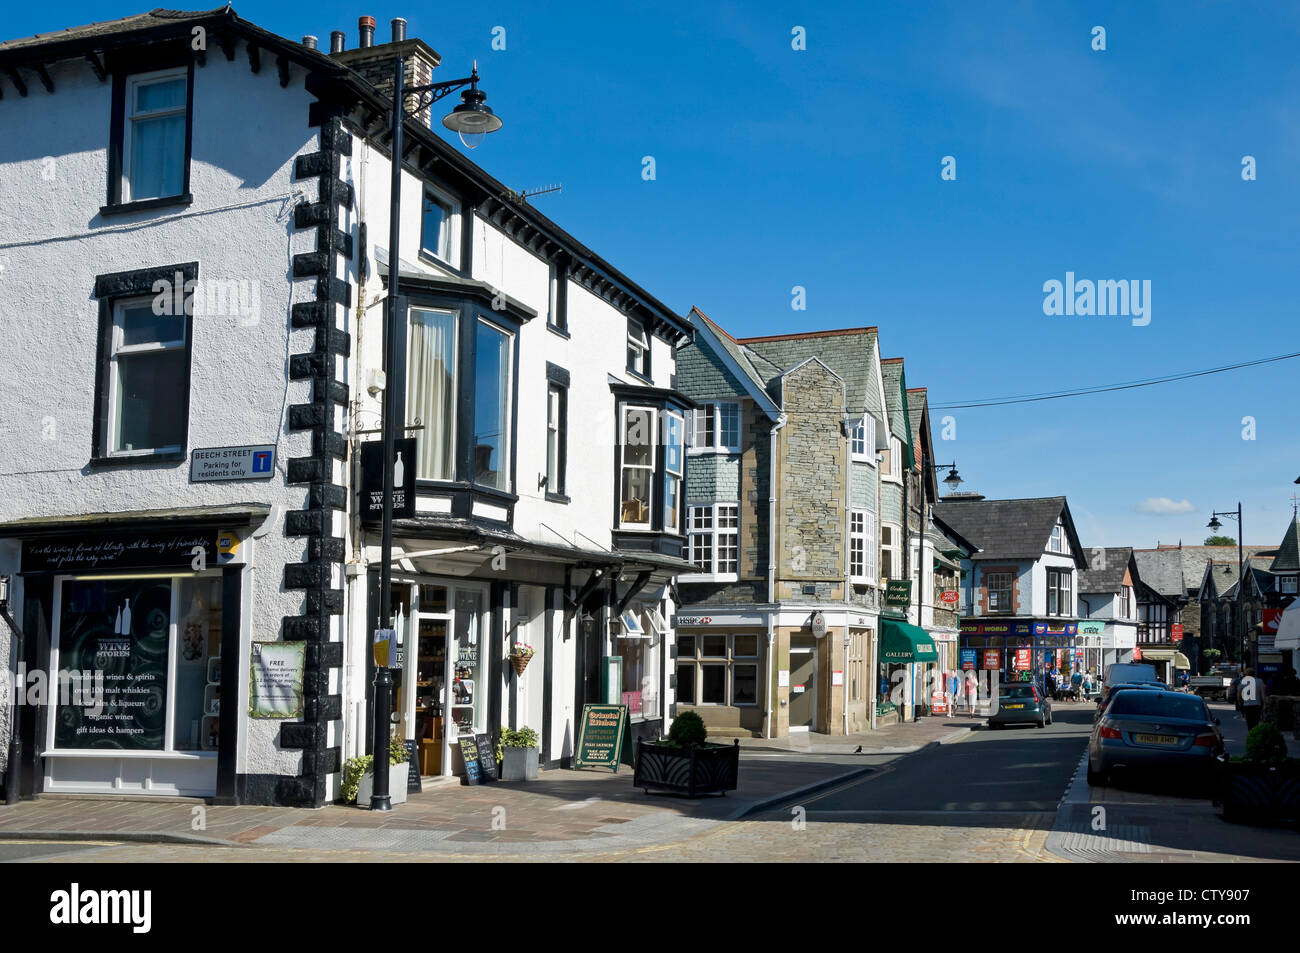 Shops businesses stores in the town centre in summer street view scene Crescent Road Windermere Cumbria England UK United Kingdom GB Great Britain Stock Photo